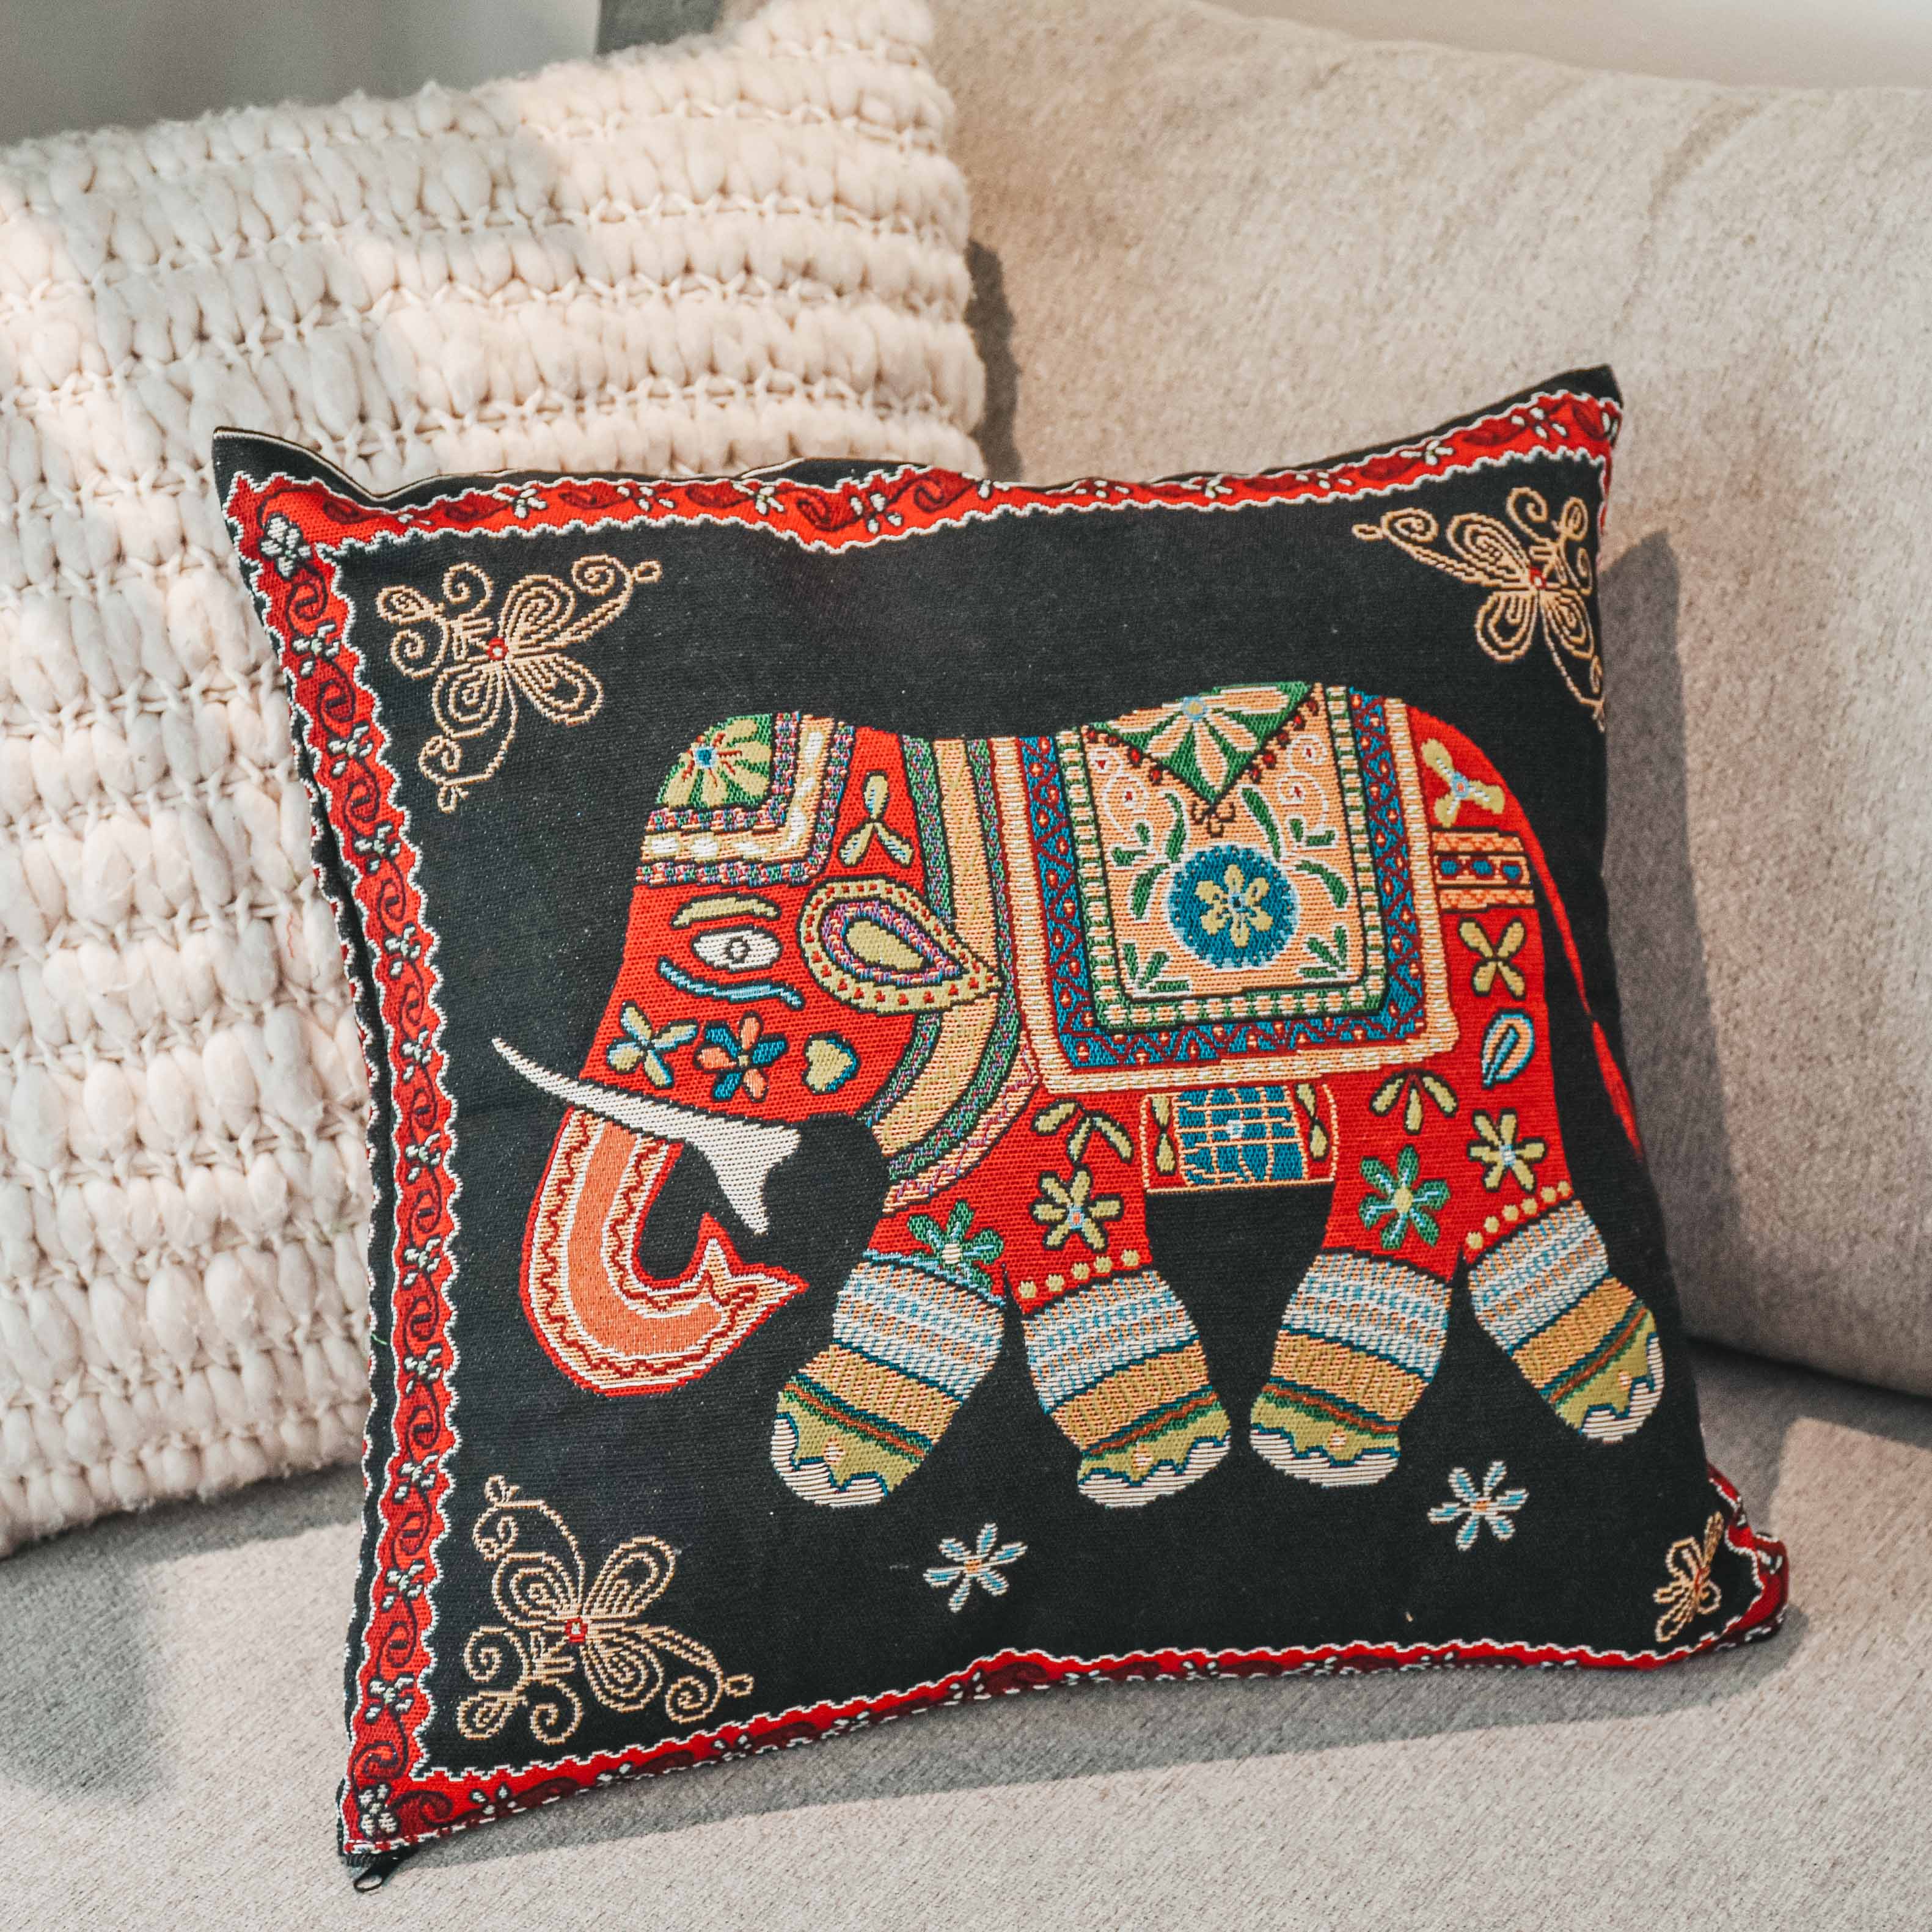 CEBU PILLOW COVER Elepanta Pillows - Buy Today Elephant Pants Jewelry And Bohemian Clothes Handmade In Thailand Help To Save The Elephants FairTrade And Vegan